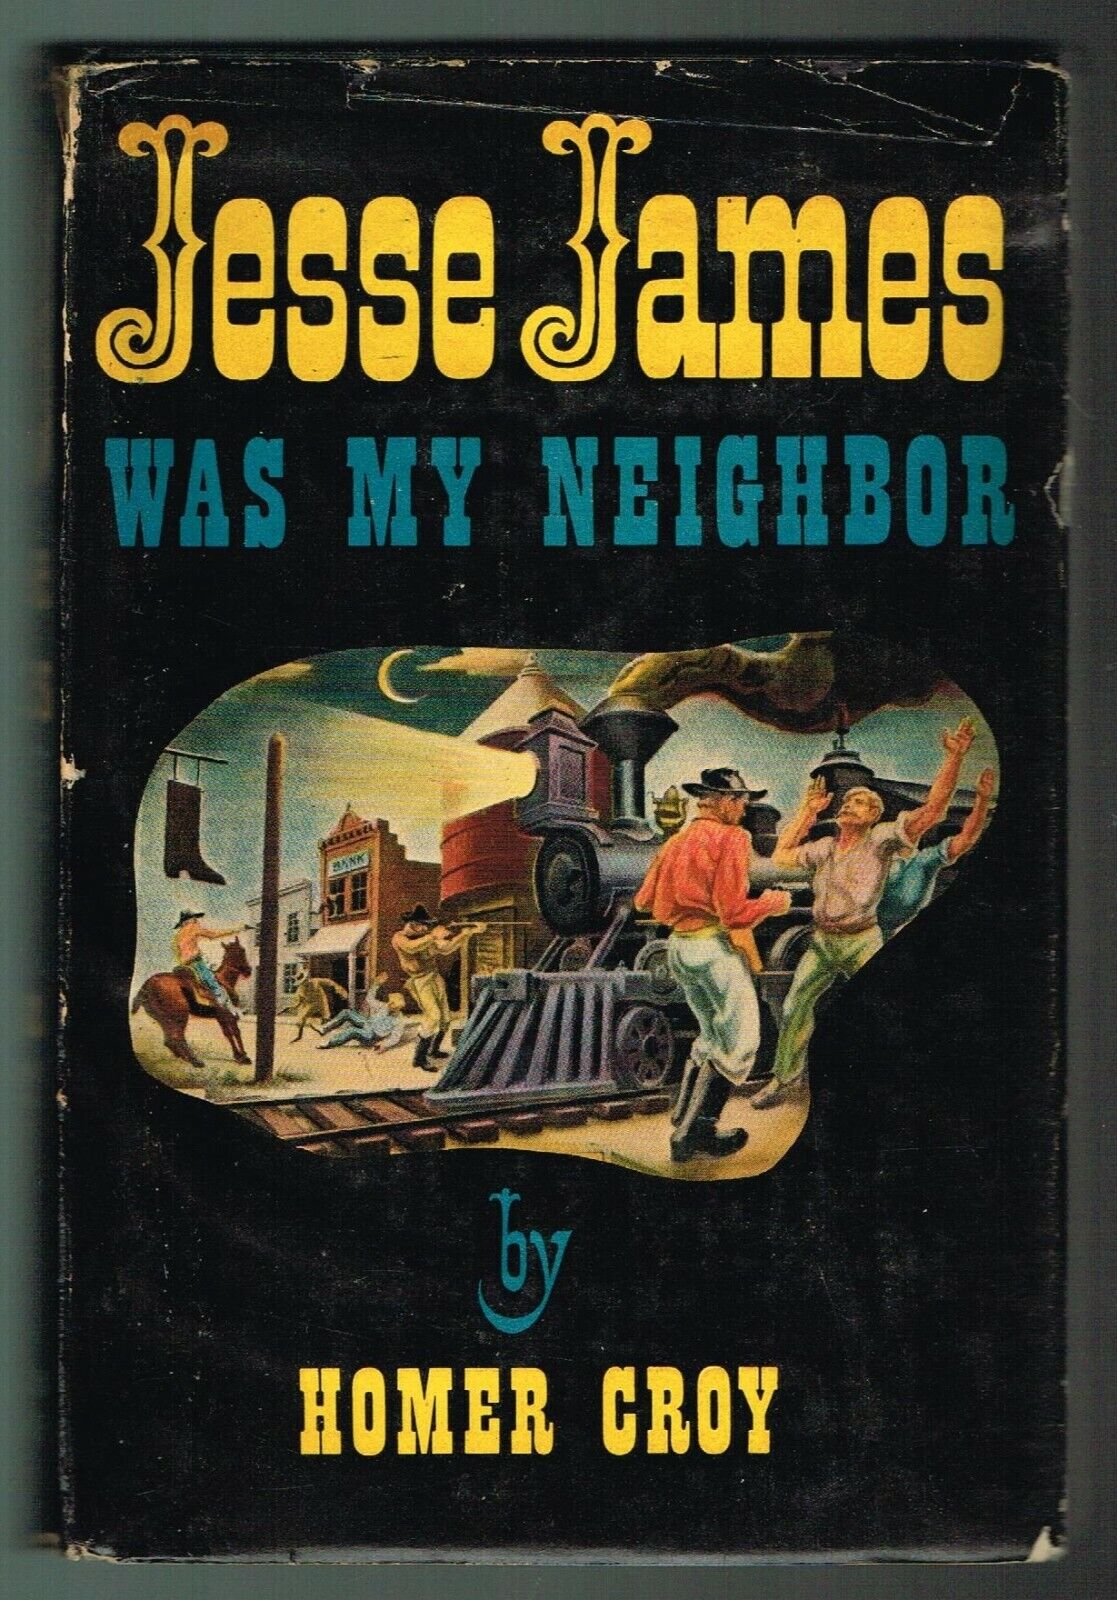 1949 Jesse James Was My Neighbor Homer Croy wild West outlaws